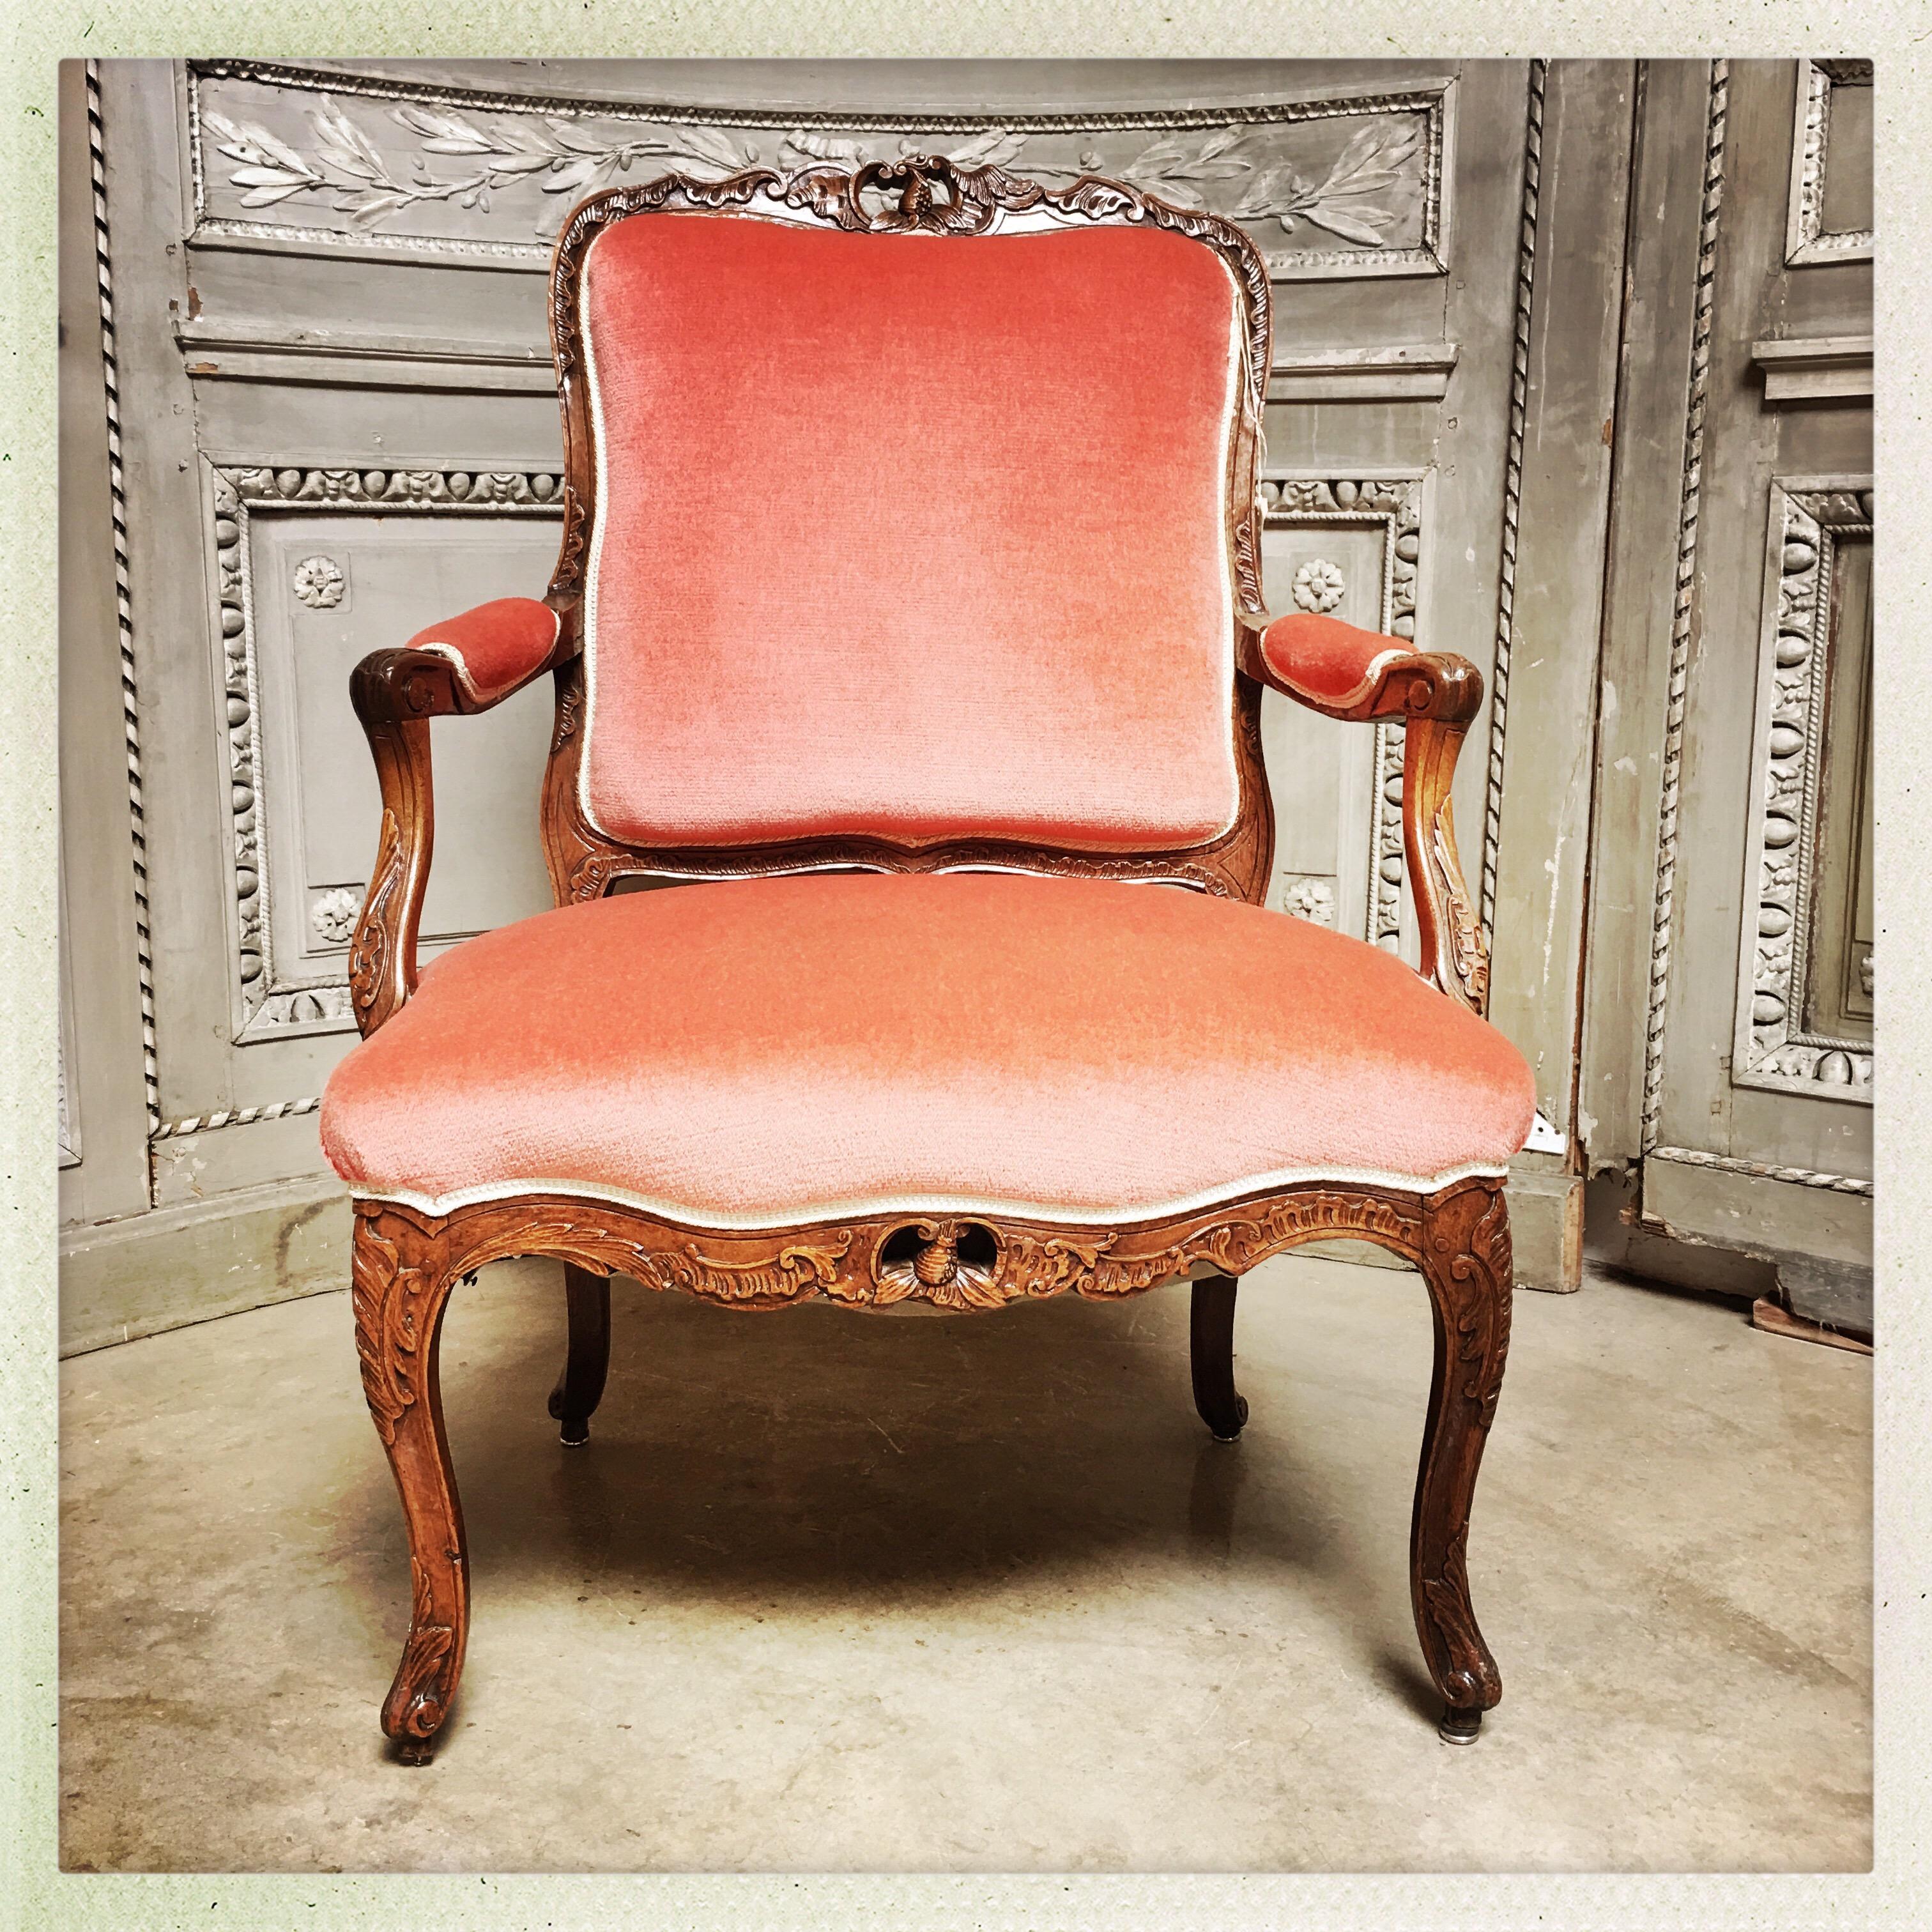 A French Louis XV carved walnut fauteuil from the Provence region of France from the 18th century.
 